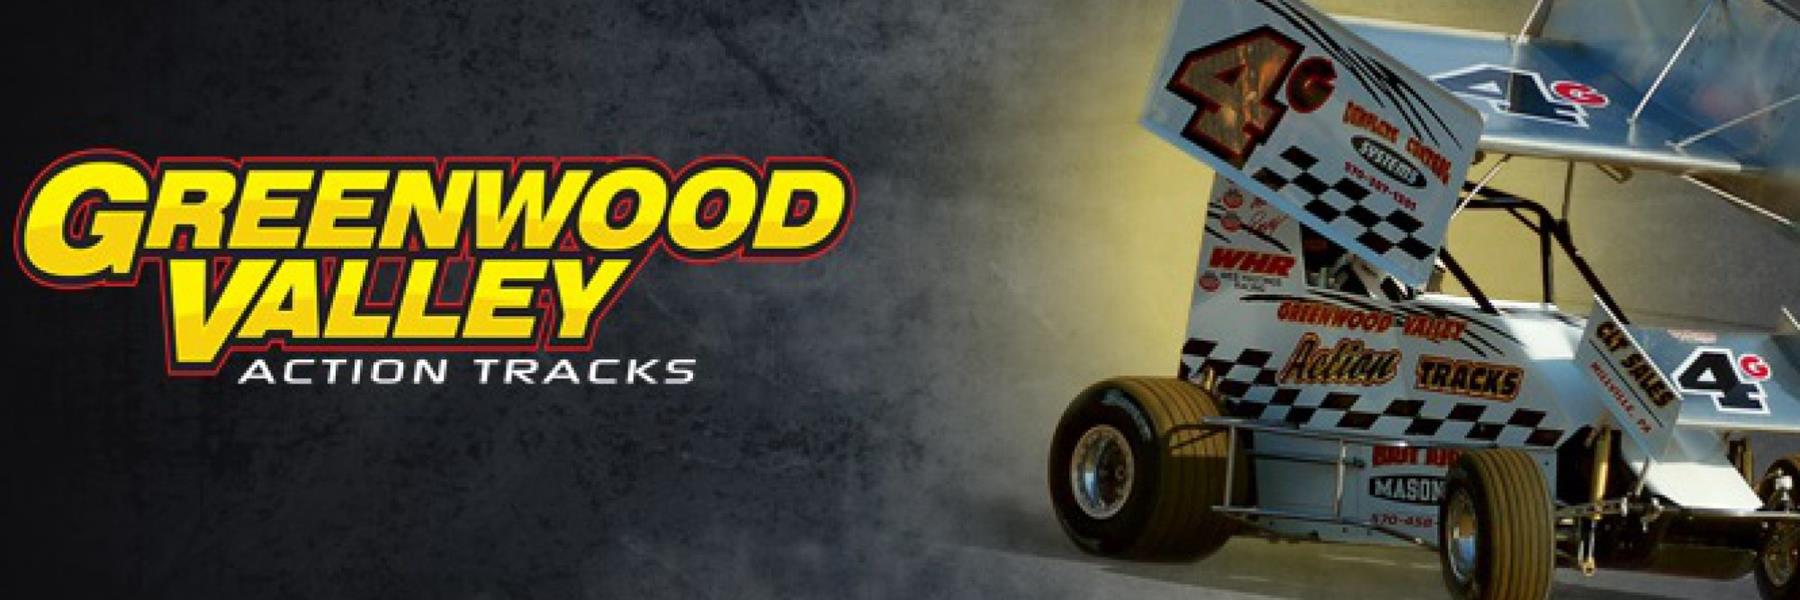 10/11/2019 - Greenwood Valley Action Track